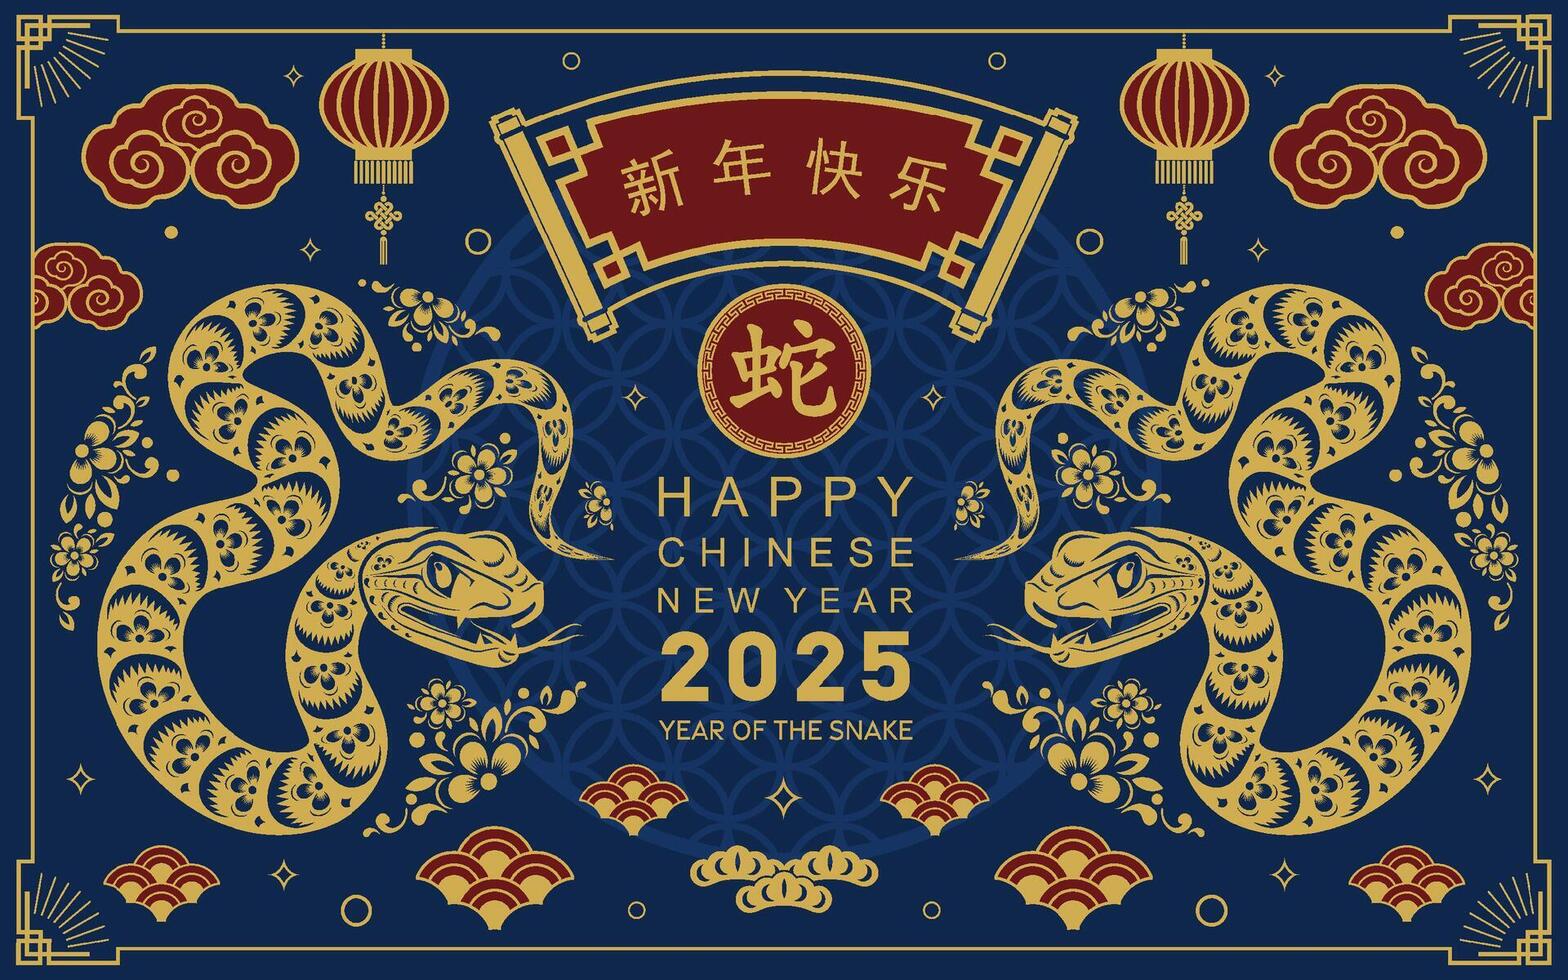 Happy chinese new year 2025 the snake zodiac sign with flower,lantern,asian elements snake logo red and gold paper cut style on color background. Happy new year 2025 year of the snake. vector